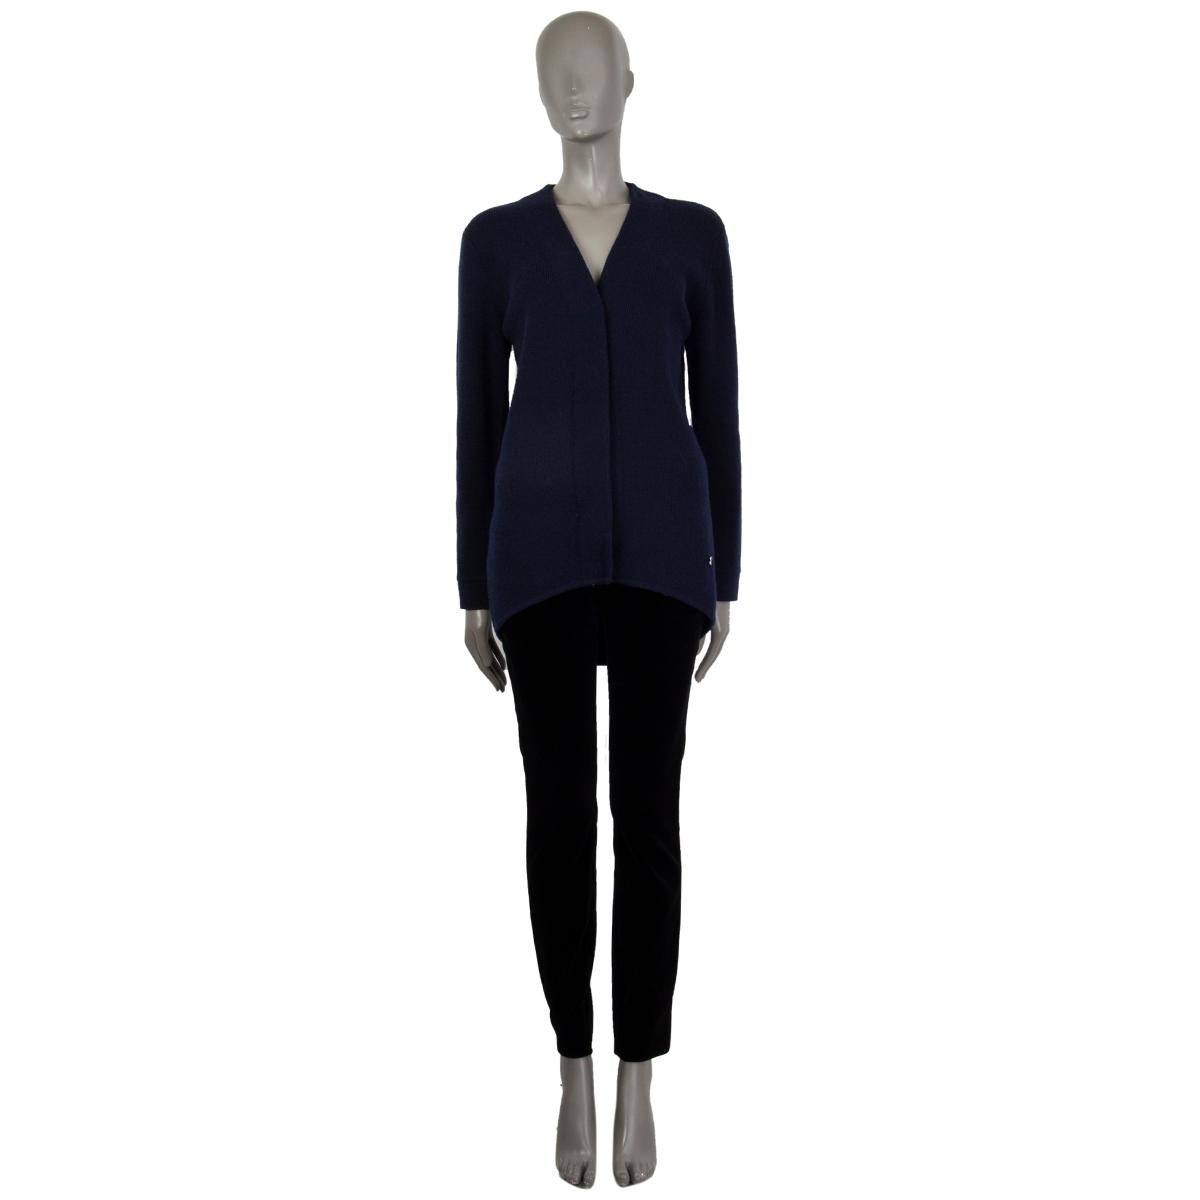 100% authentic Balenciaga cardigan in midnight blue lamb wool (100%) with a v-neck. Closes with concealed snap buttons. Unlined. Has been worn and is in excellent condition. 

Measurements
Tag Size	36
Size	XS
Shoulder Width	45cm (17.6in)
Bust	96cm